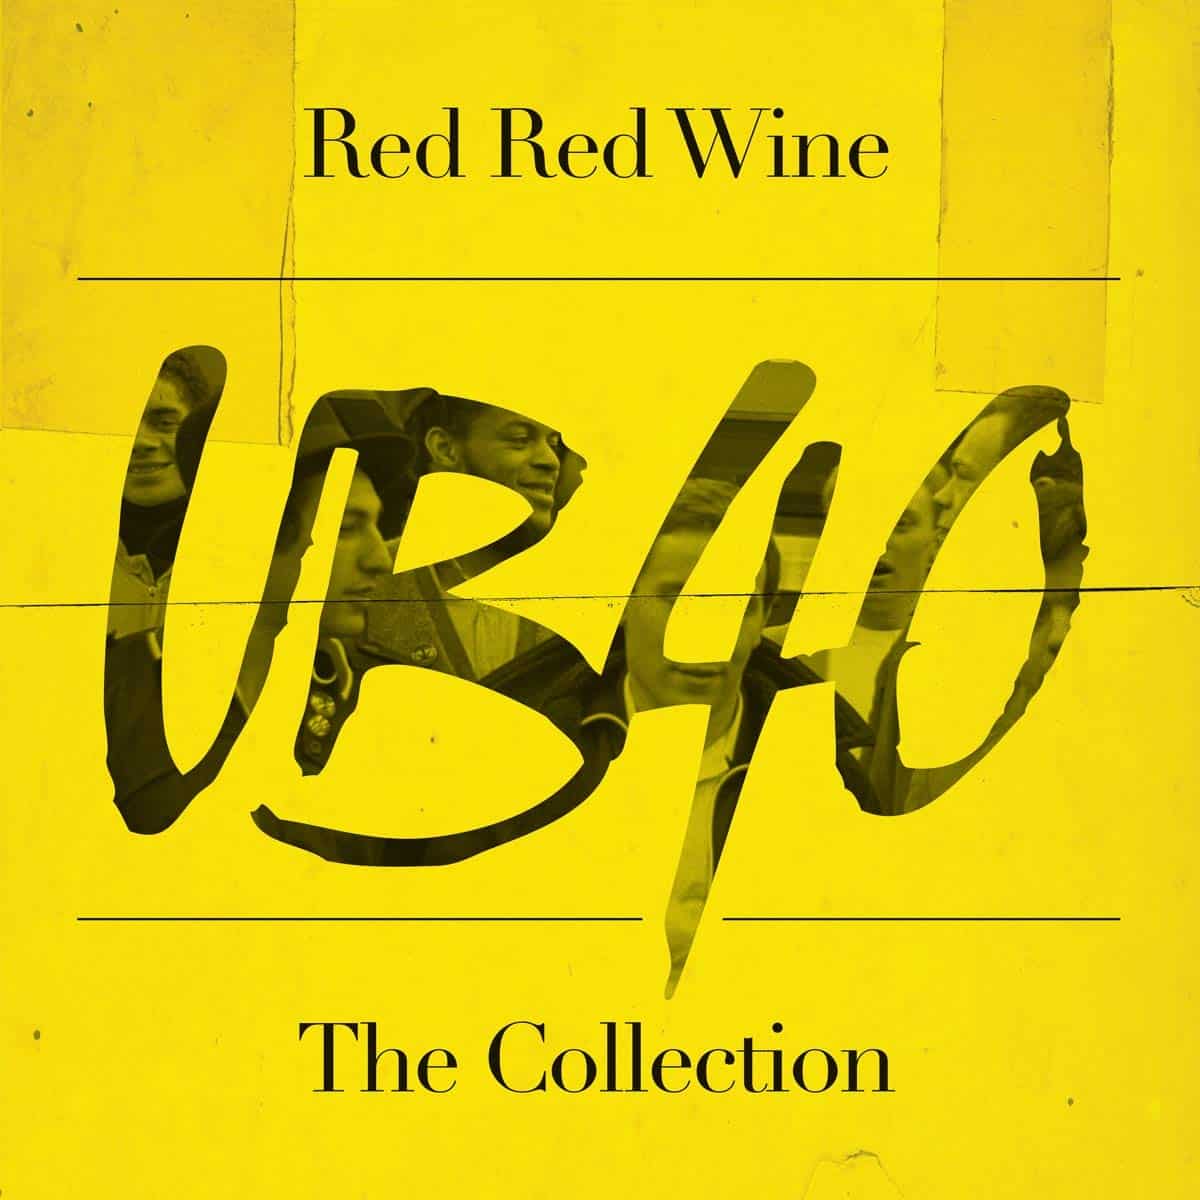 UB40-Red-Red-Wine-the-Collection-LP-vinyl-record-album-front